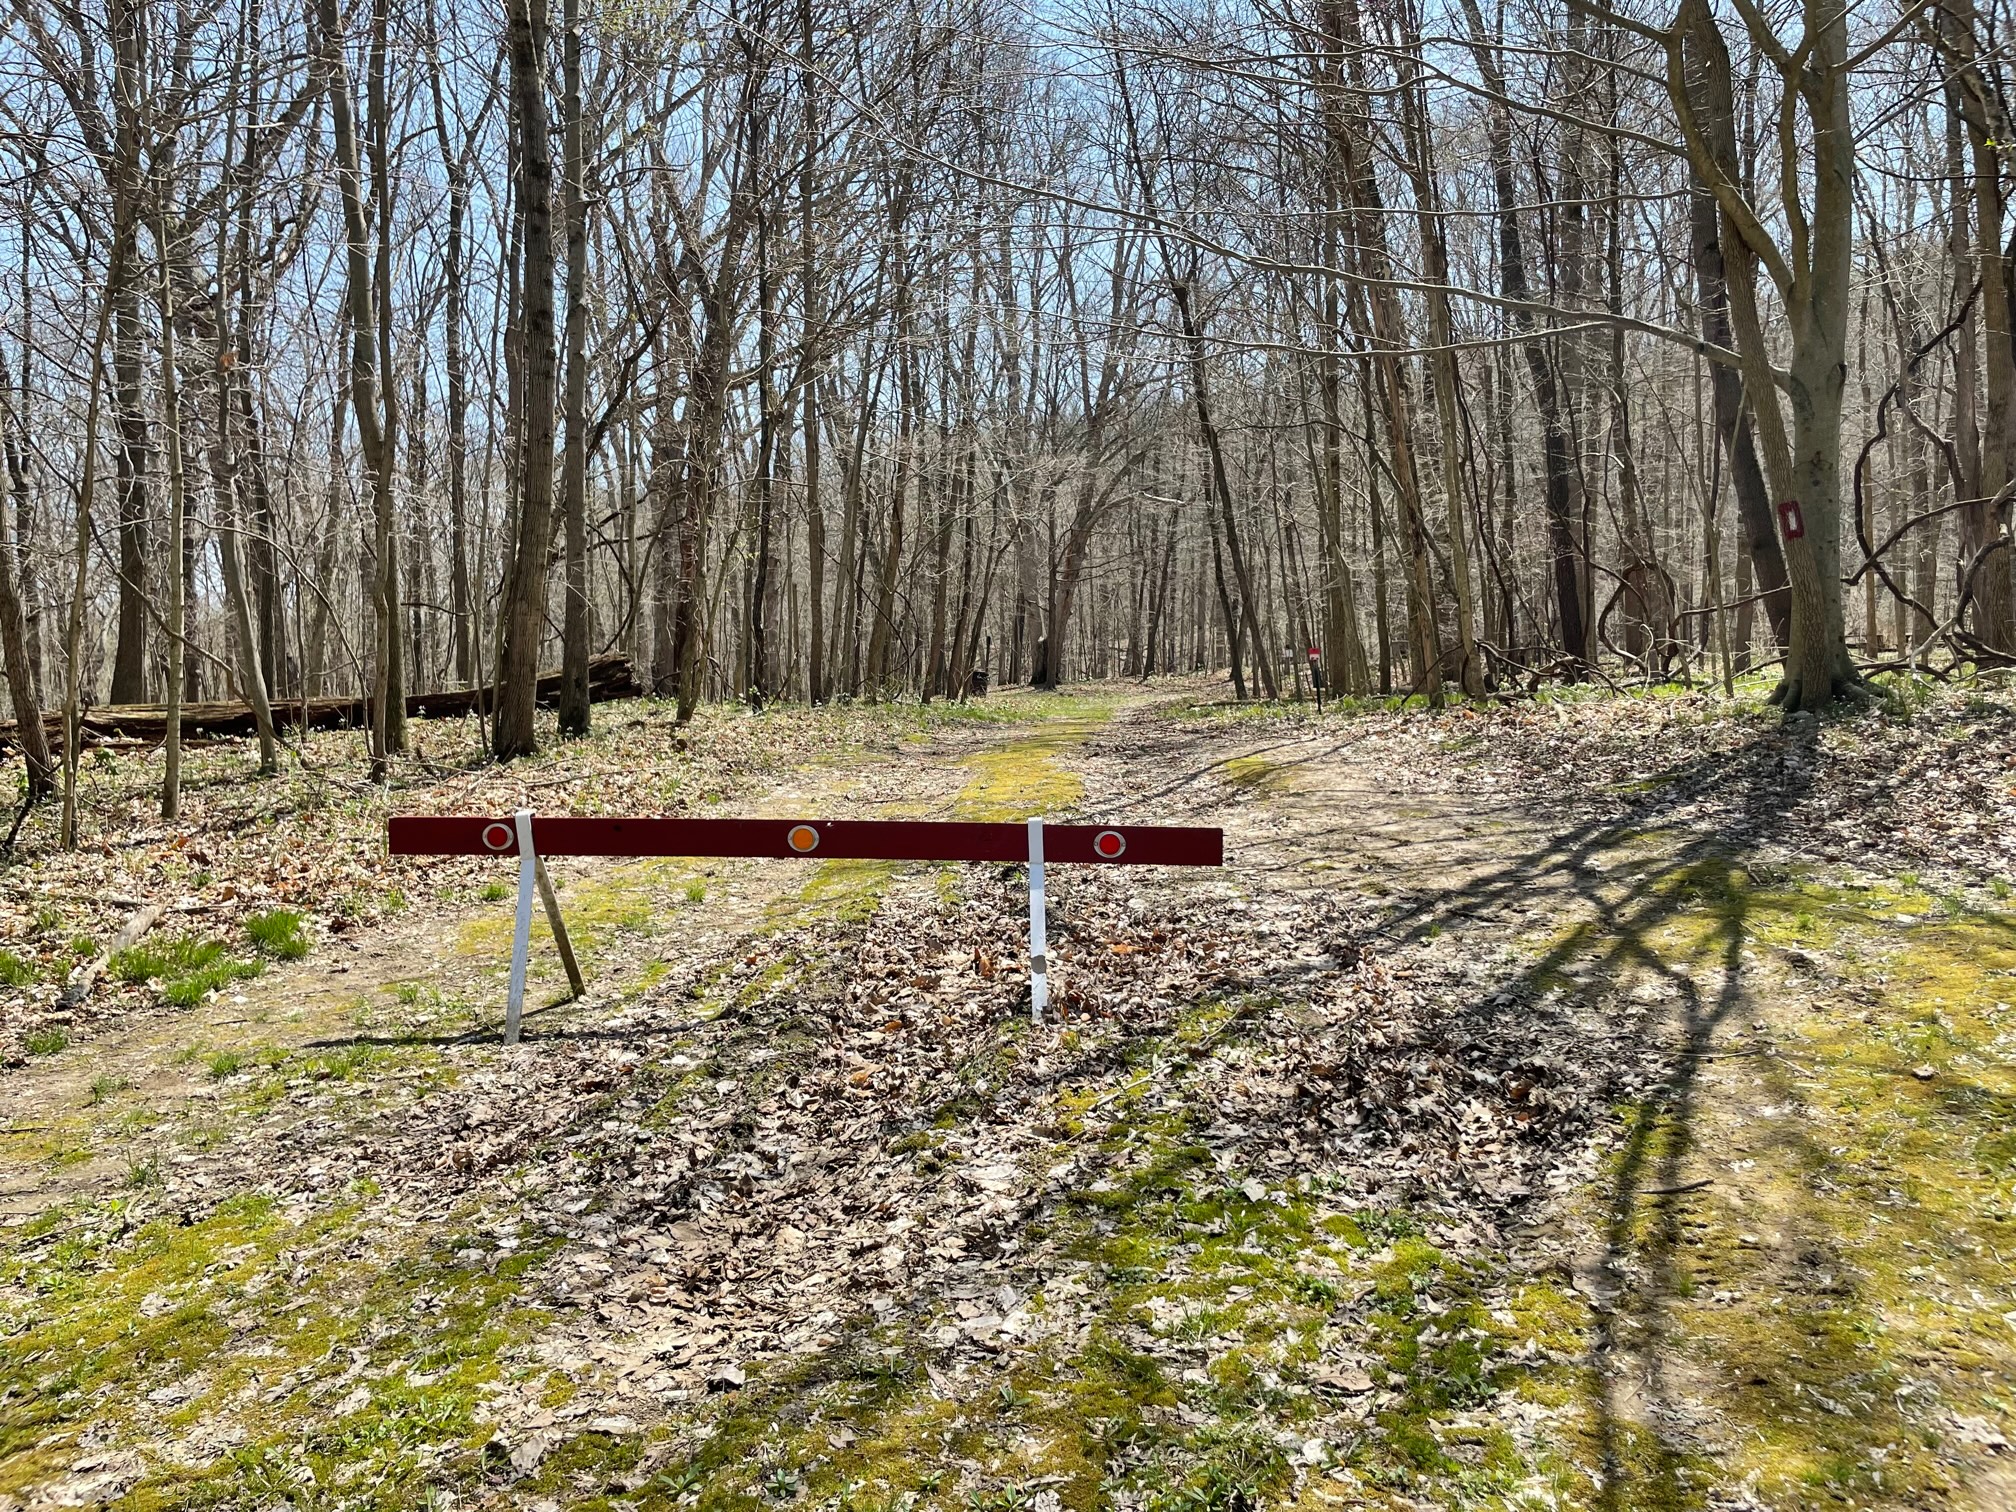 Photo of a red barricade with three small reflectors spanning a trail in the woods. There are trees on either side. Main colors are browns and greens.